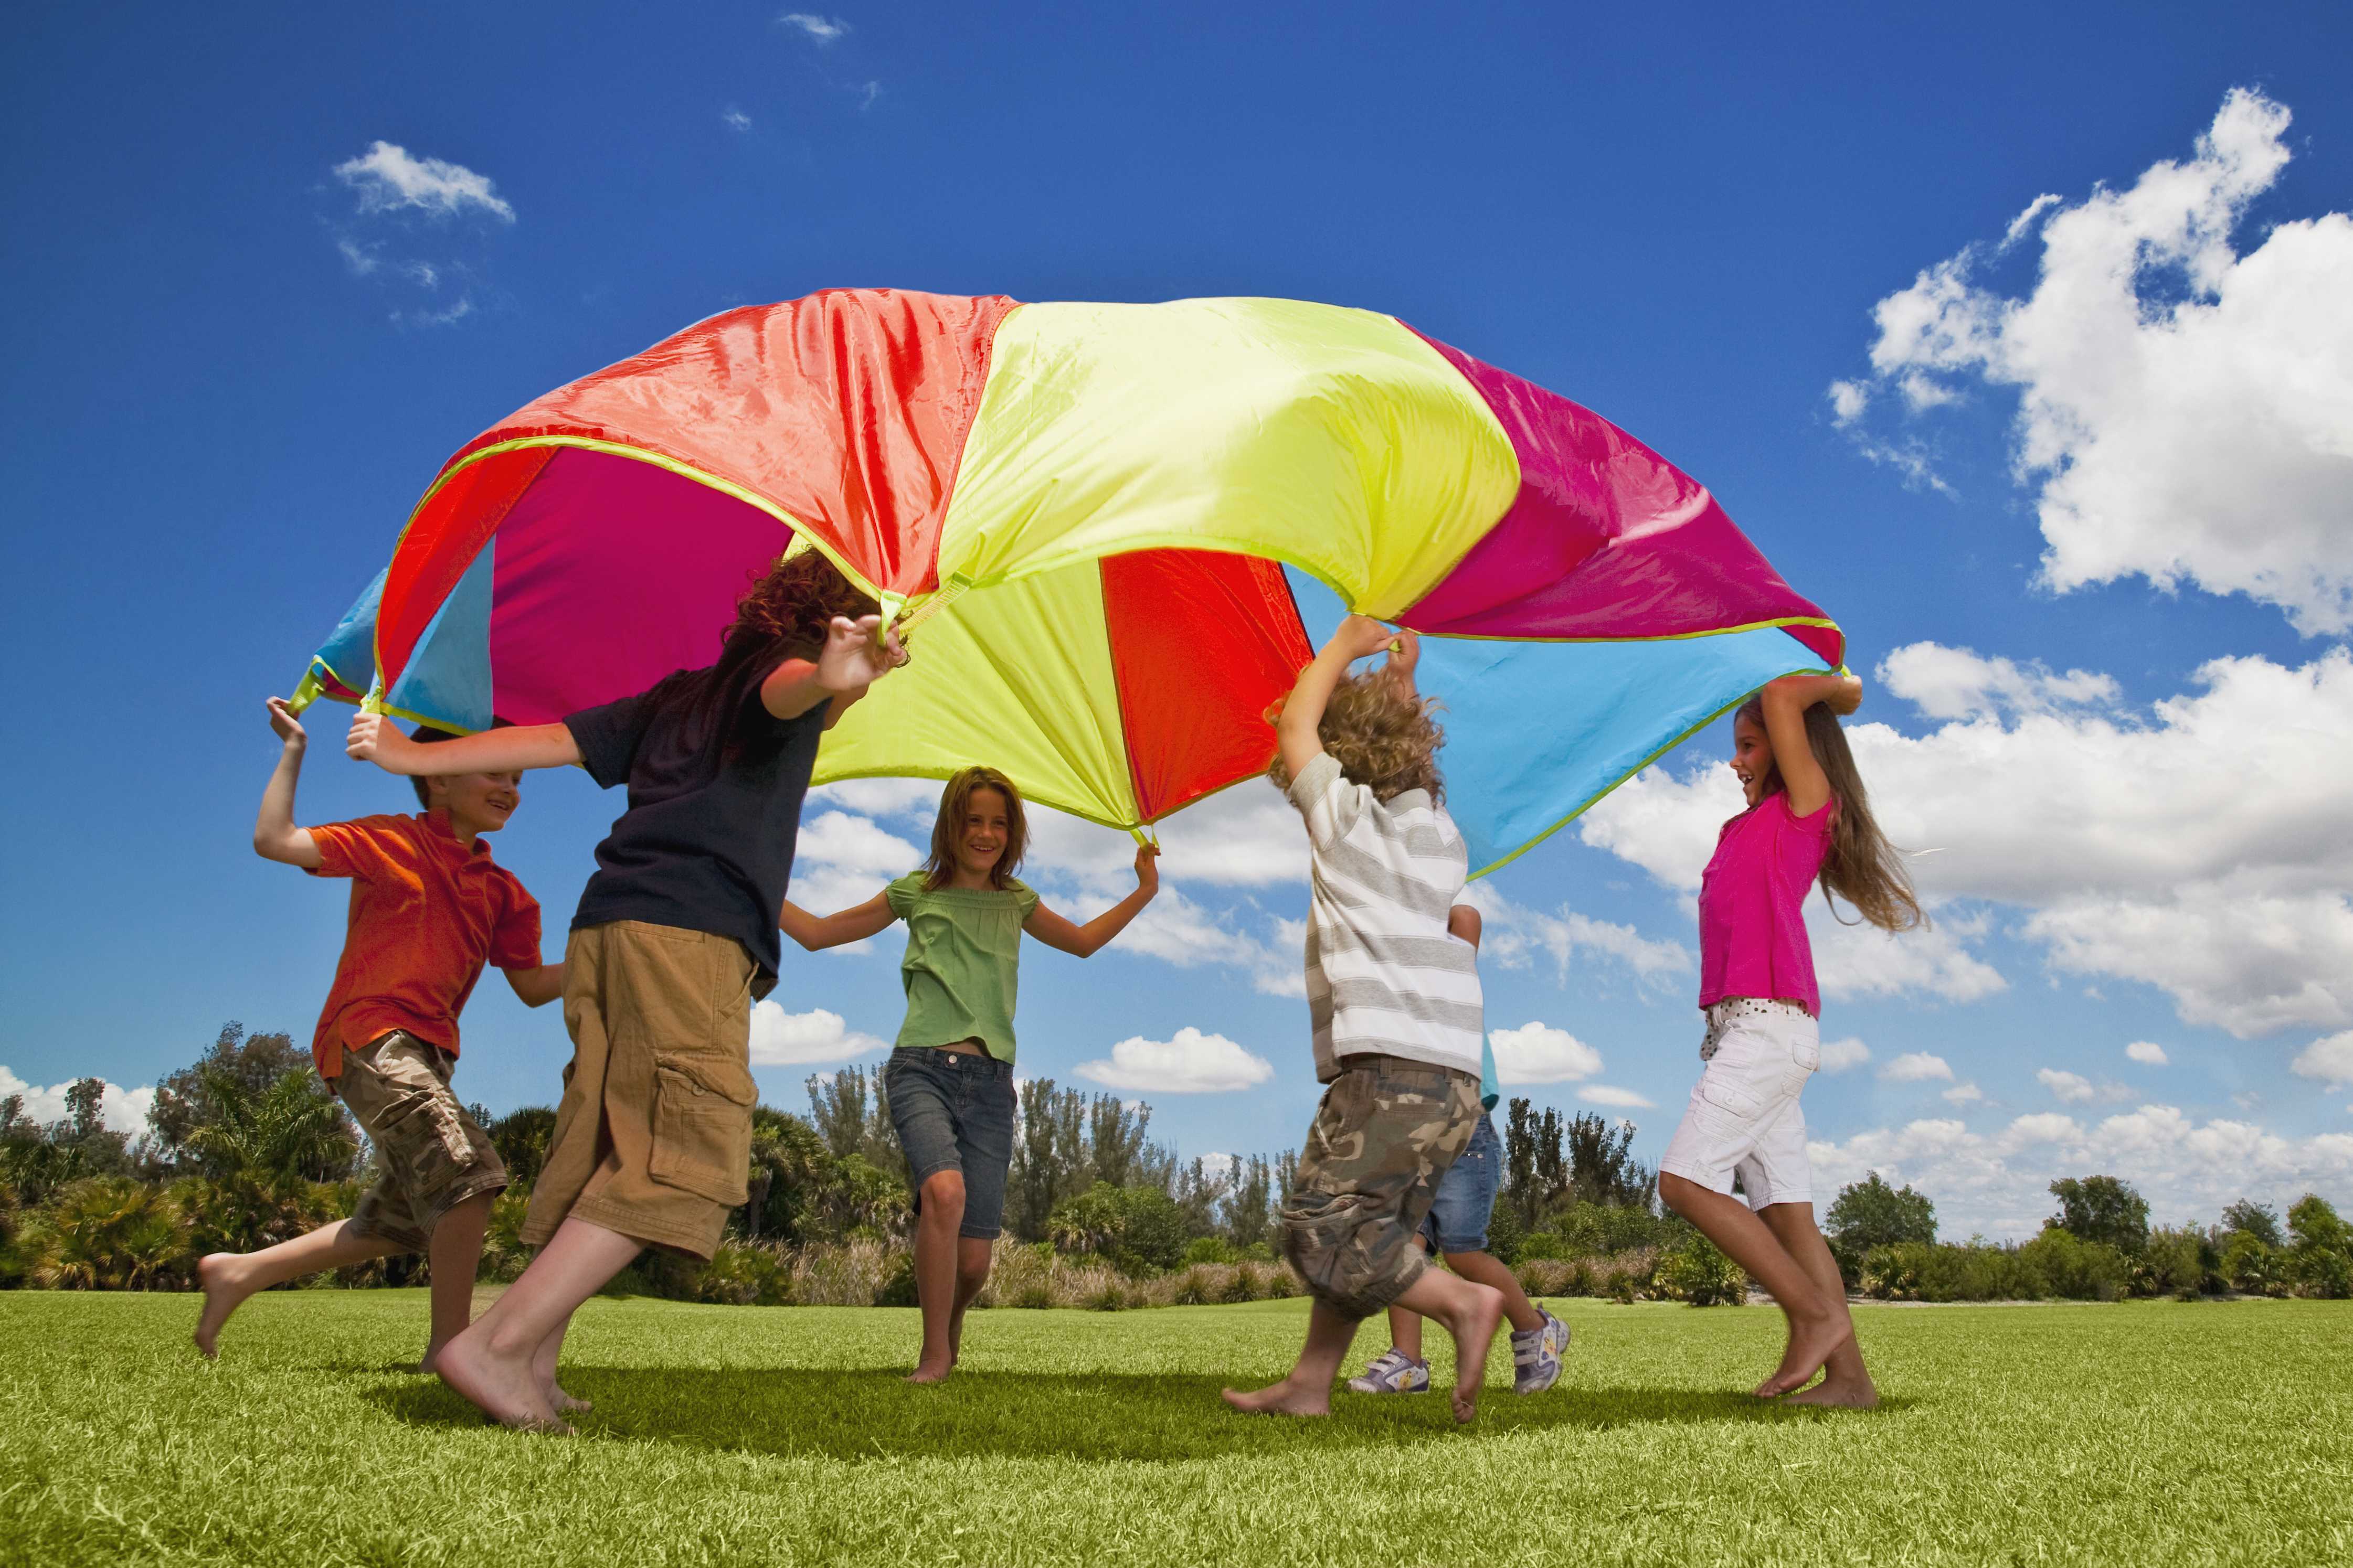 Group of kids playing with a parachute in the park (Mark Mann&mdash;Getty Images)